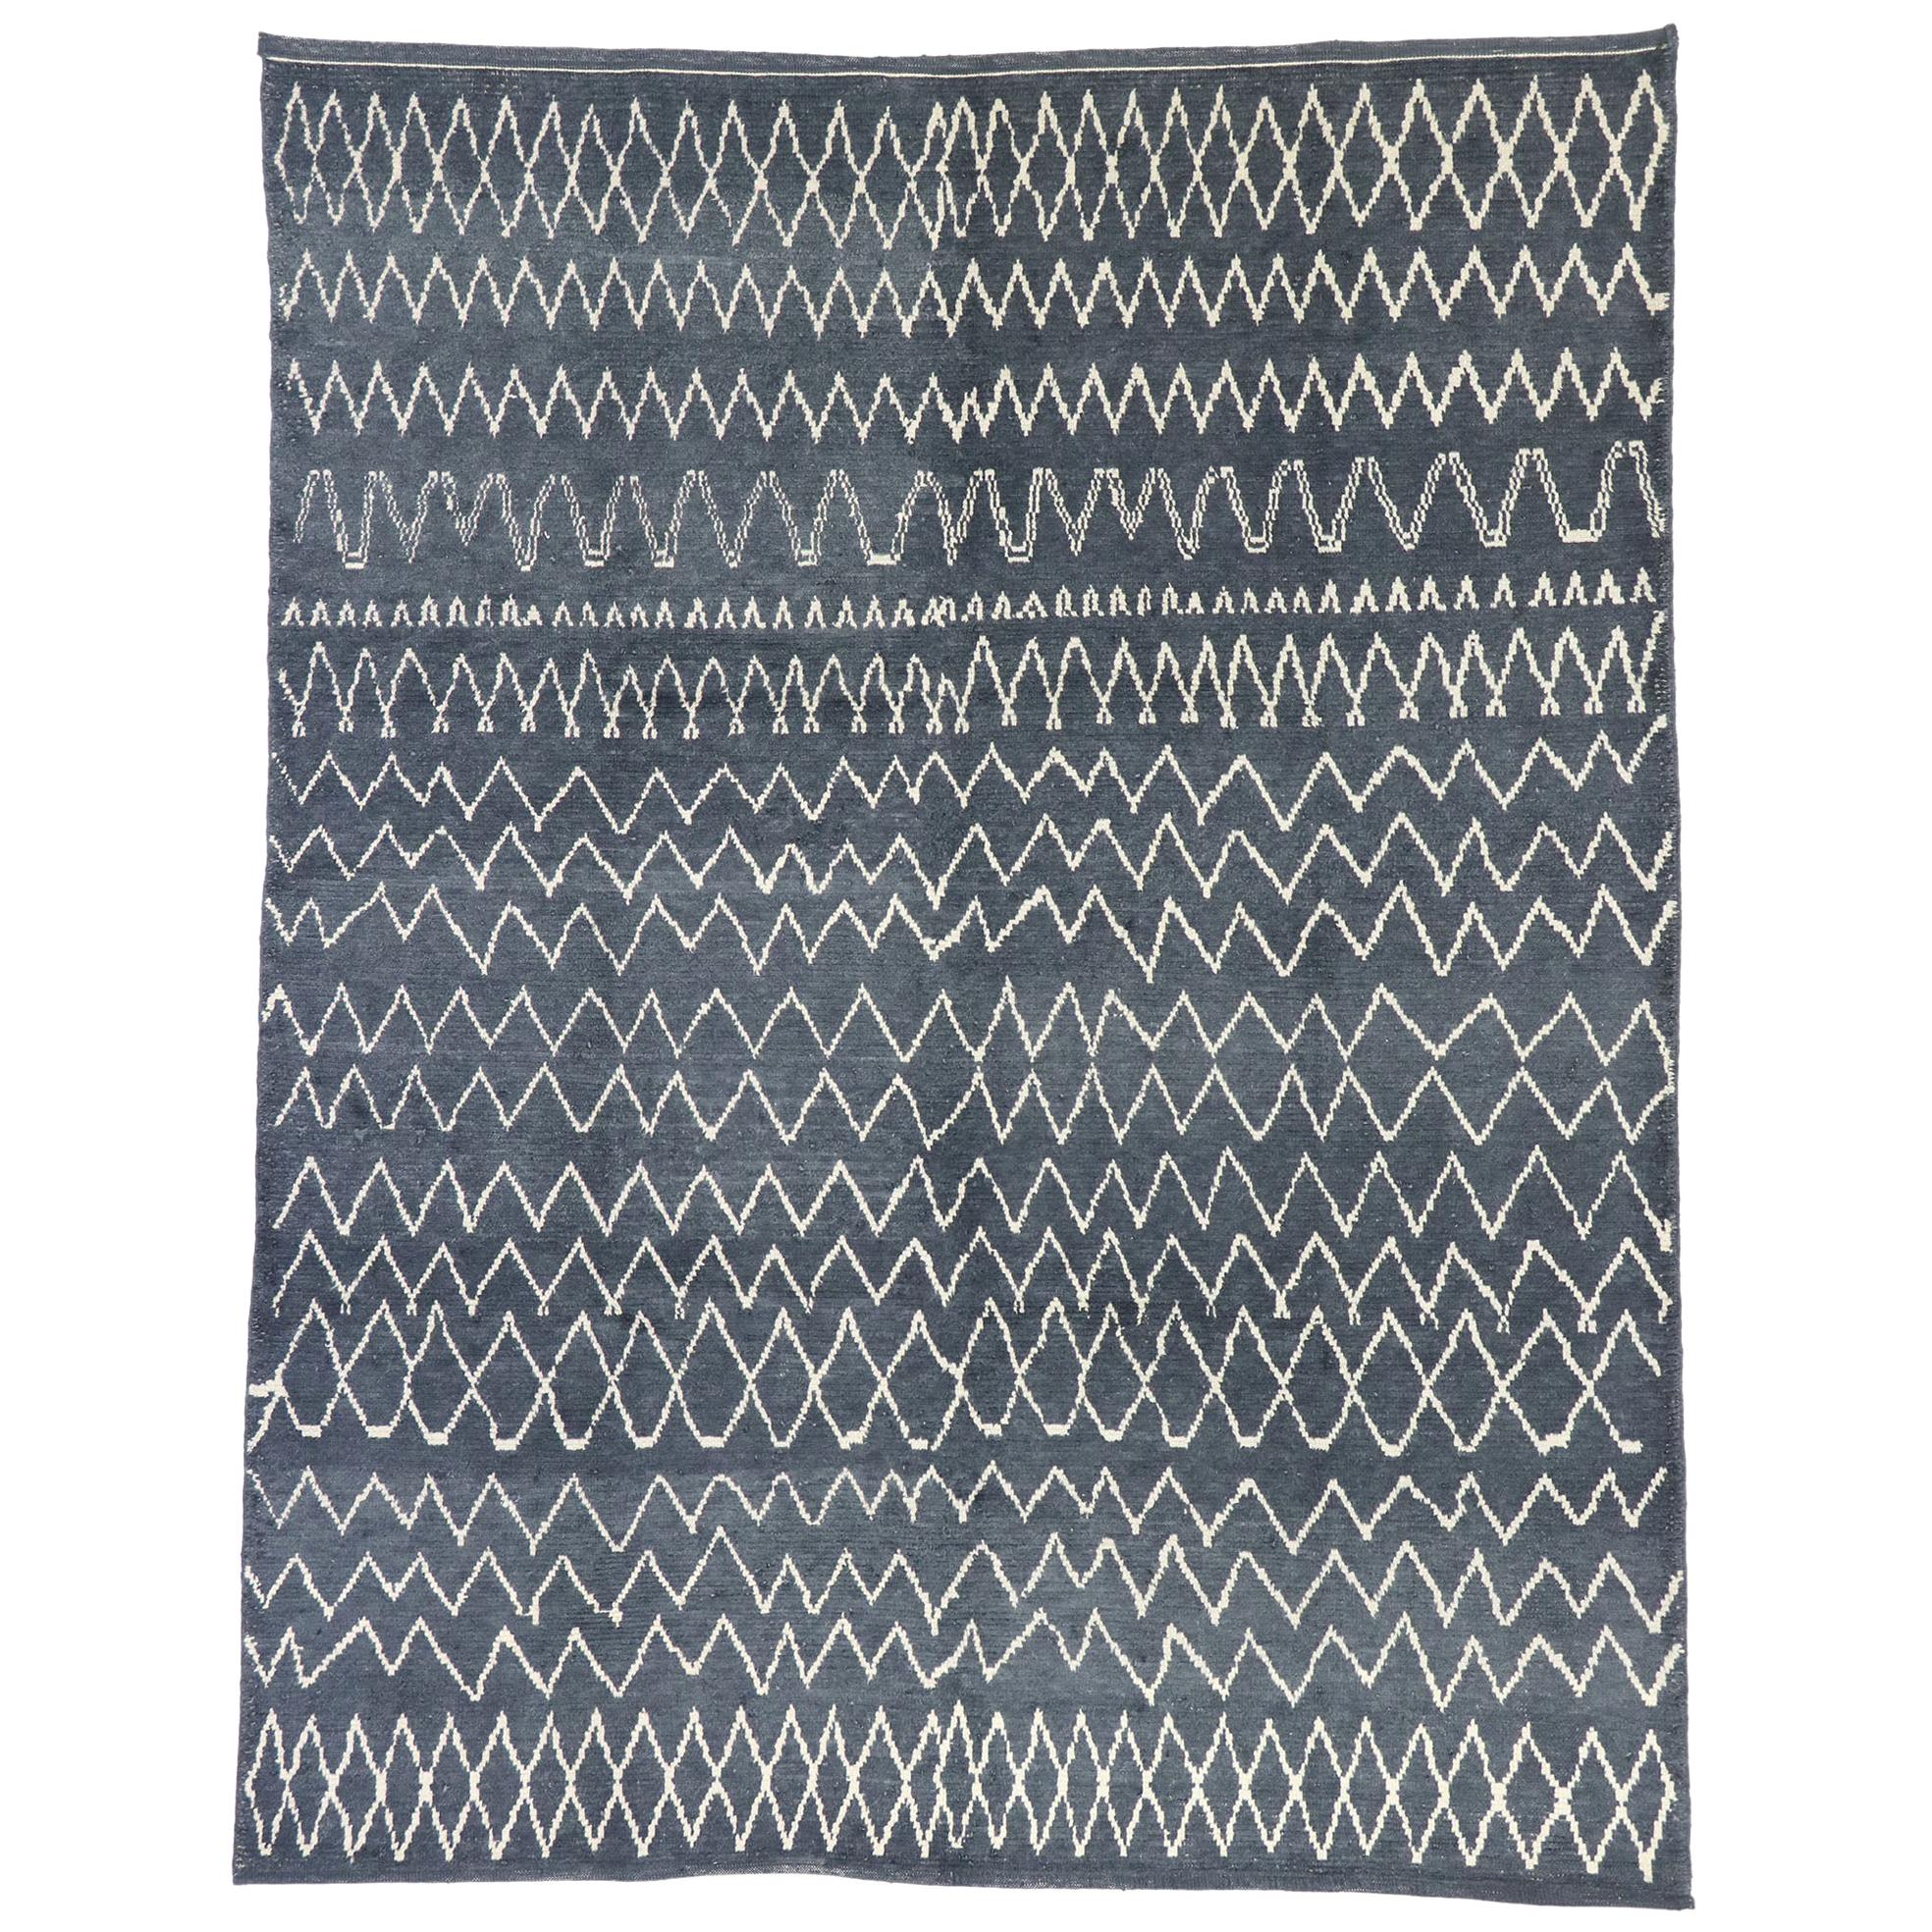 New Contemporary Moroccan Style Rug with Diamond Pattern and Chevron Design